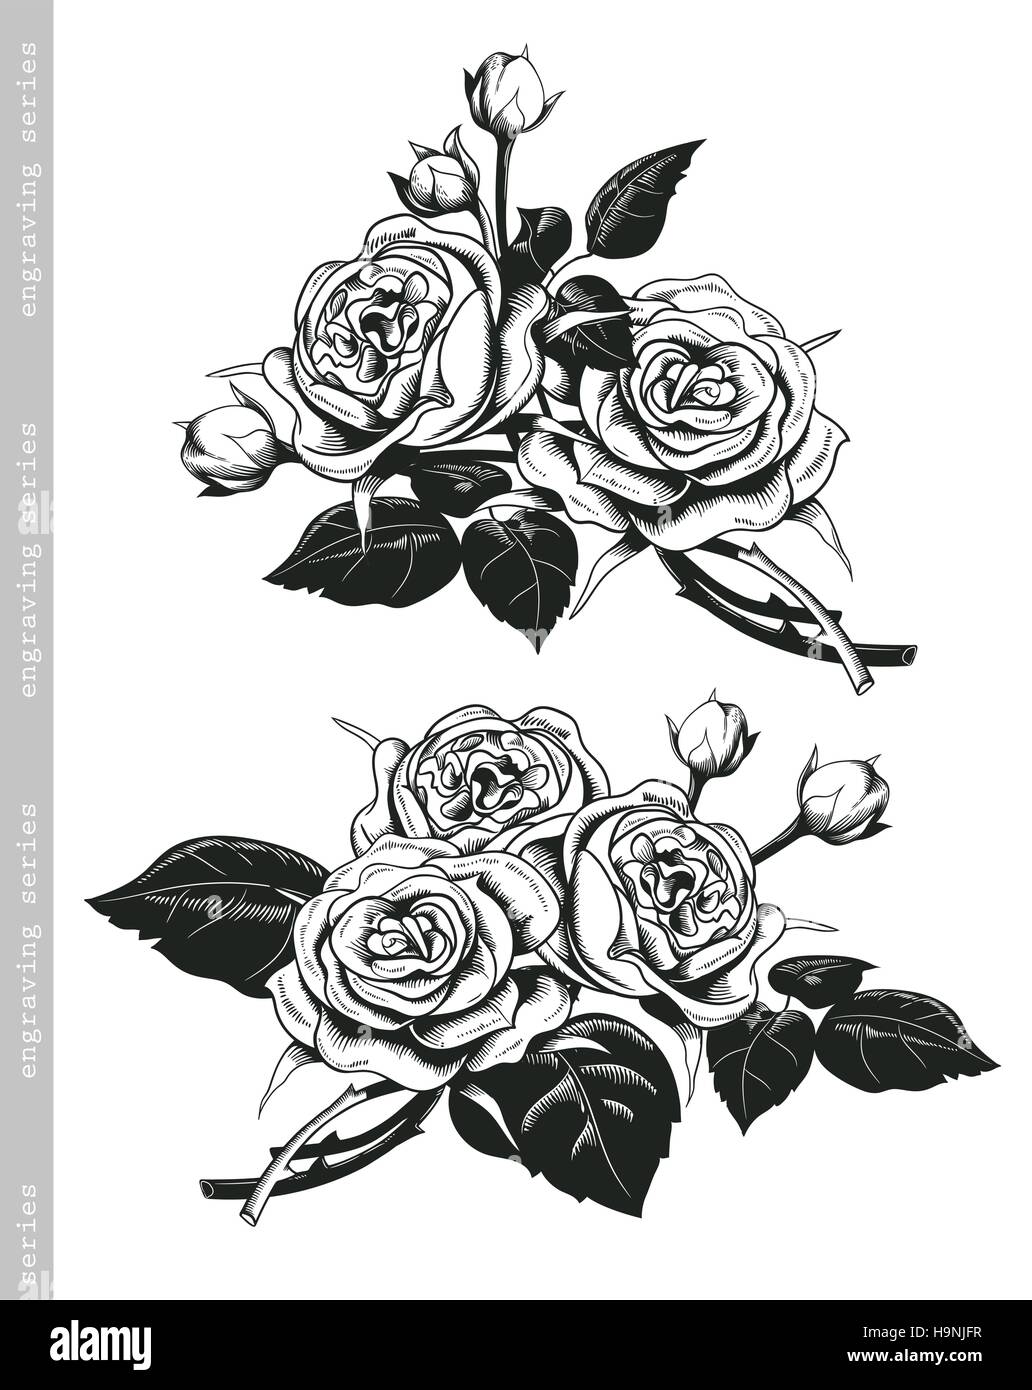 Hand sketched set of white roses in vintage engraving style. Baroque decorative elements. Floral doodles, leaves, branches, flowers, laurels, banners Stock Vector